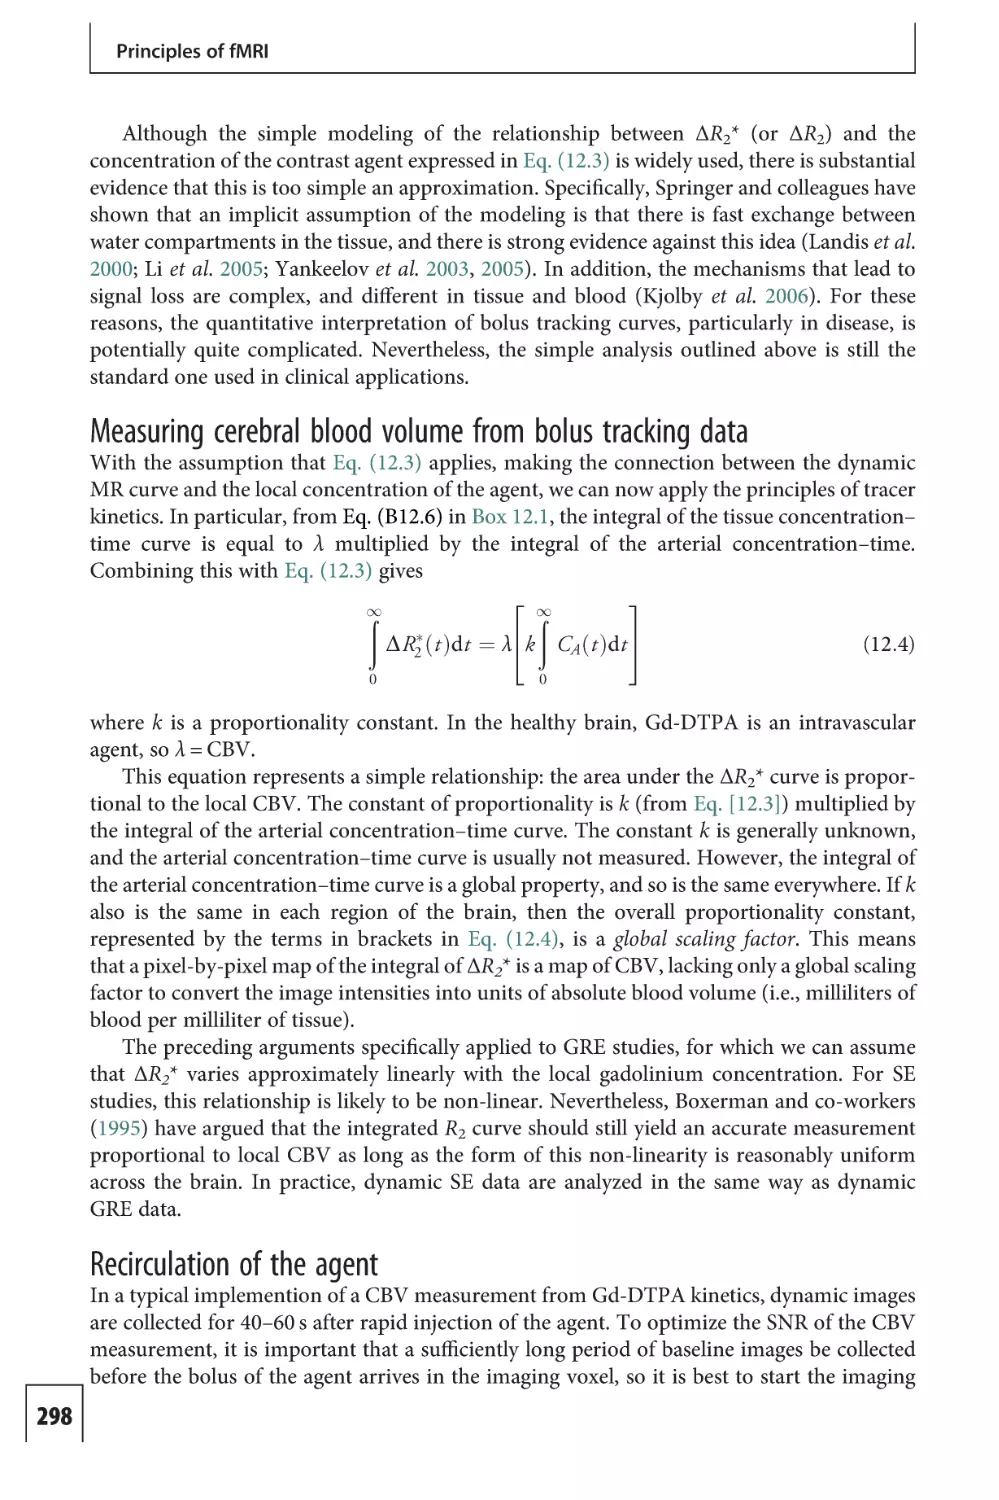 Measuring cerebral blood volume from bolus tracking data
Recirculation of the agent